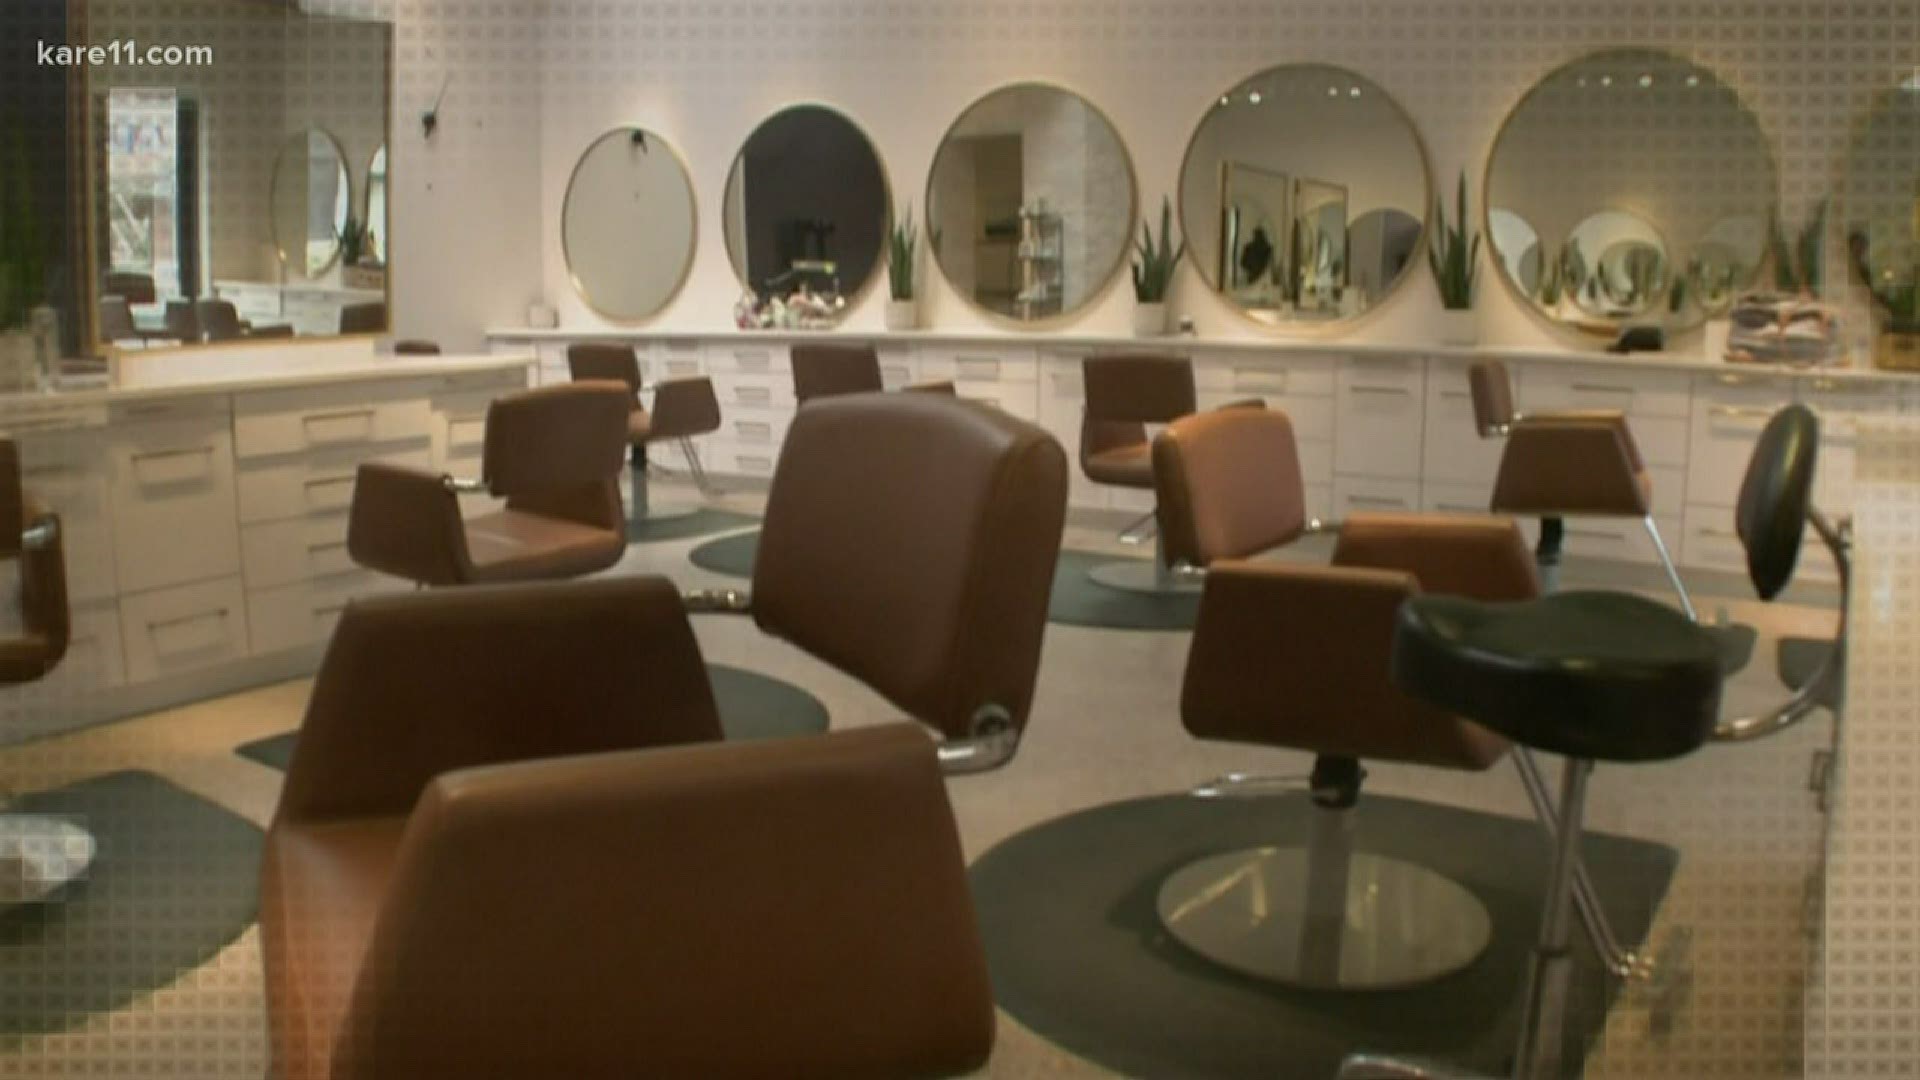 Once Minnesota salons, barbershops and spas reopen, customers will have a new experience.